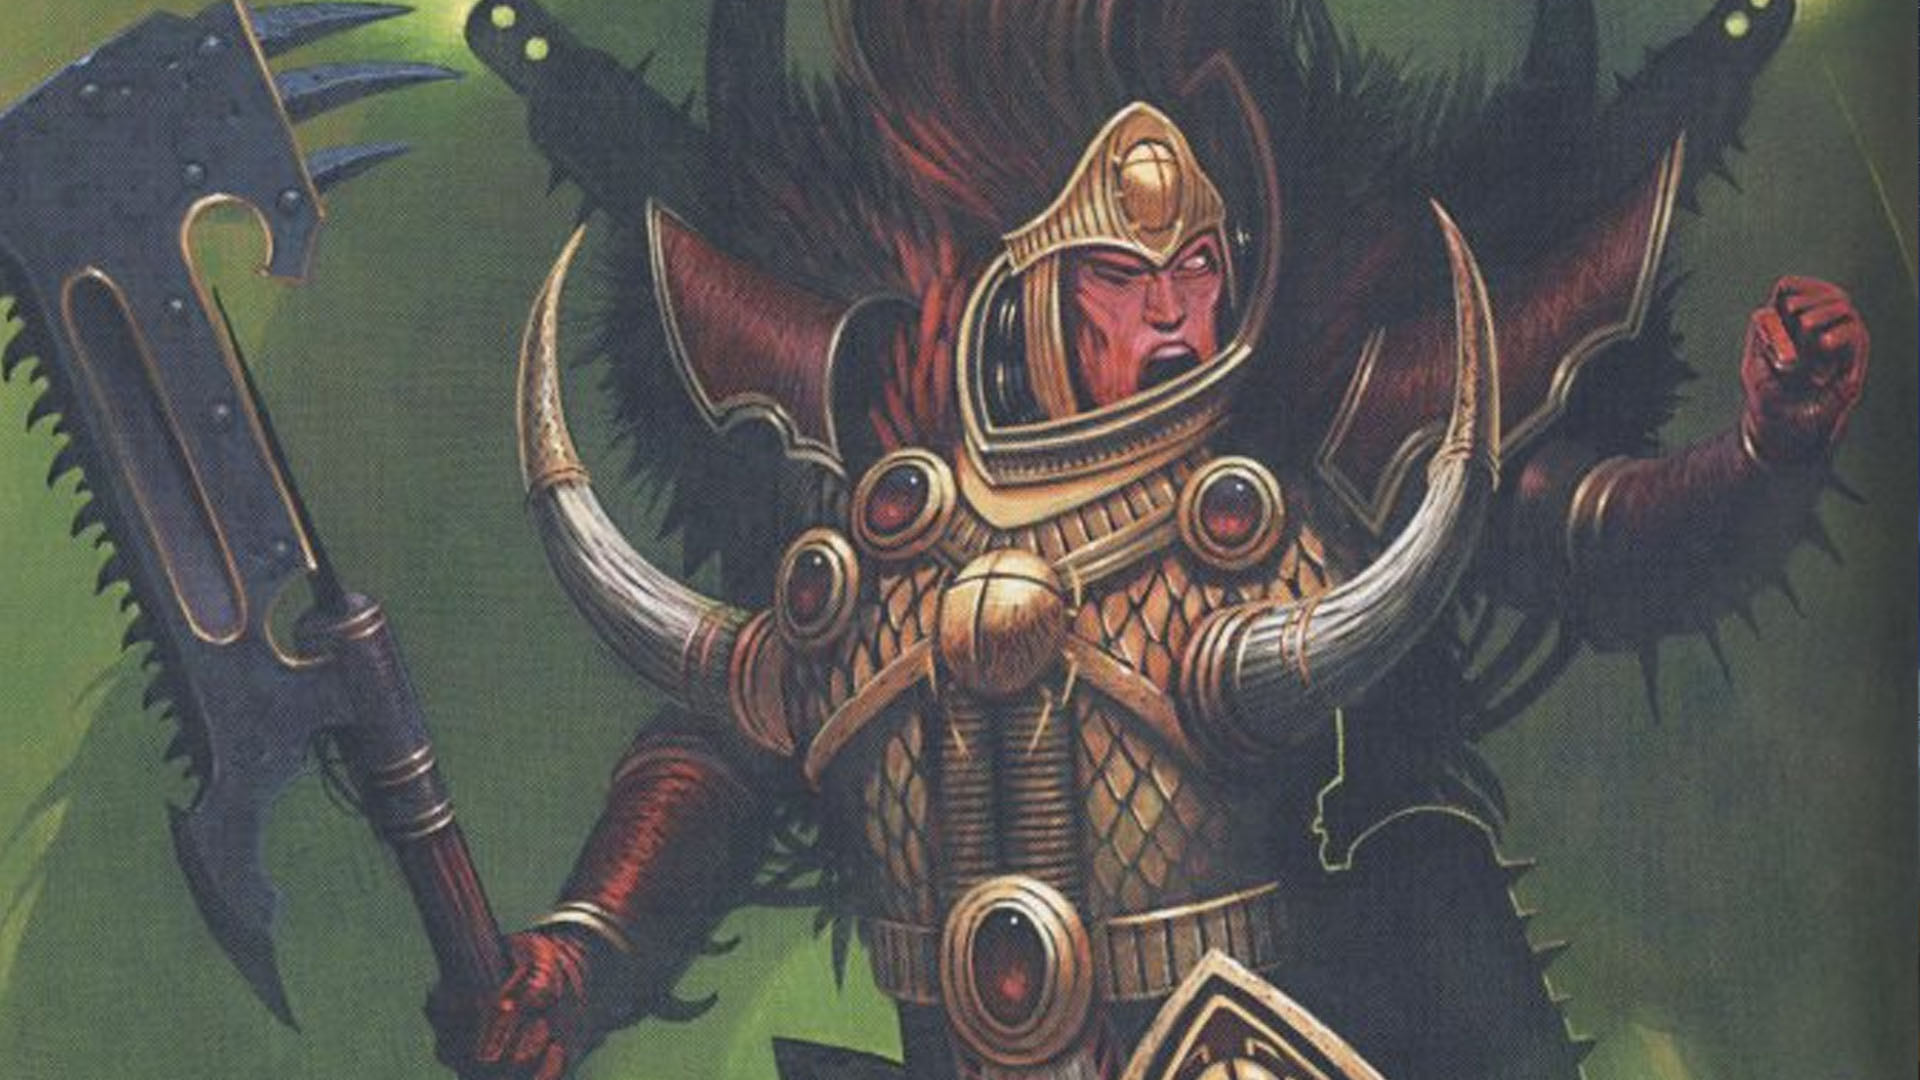 Warhammer 40k's Magnus the Red – meet the Thousand Sons Primarch